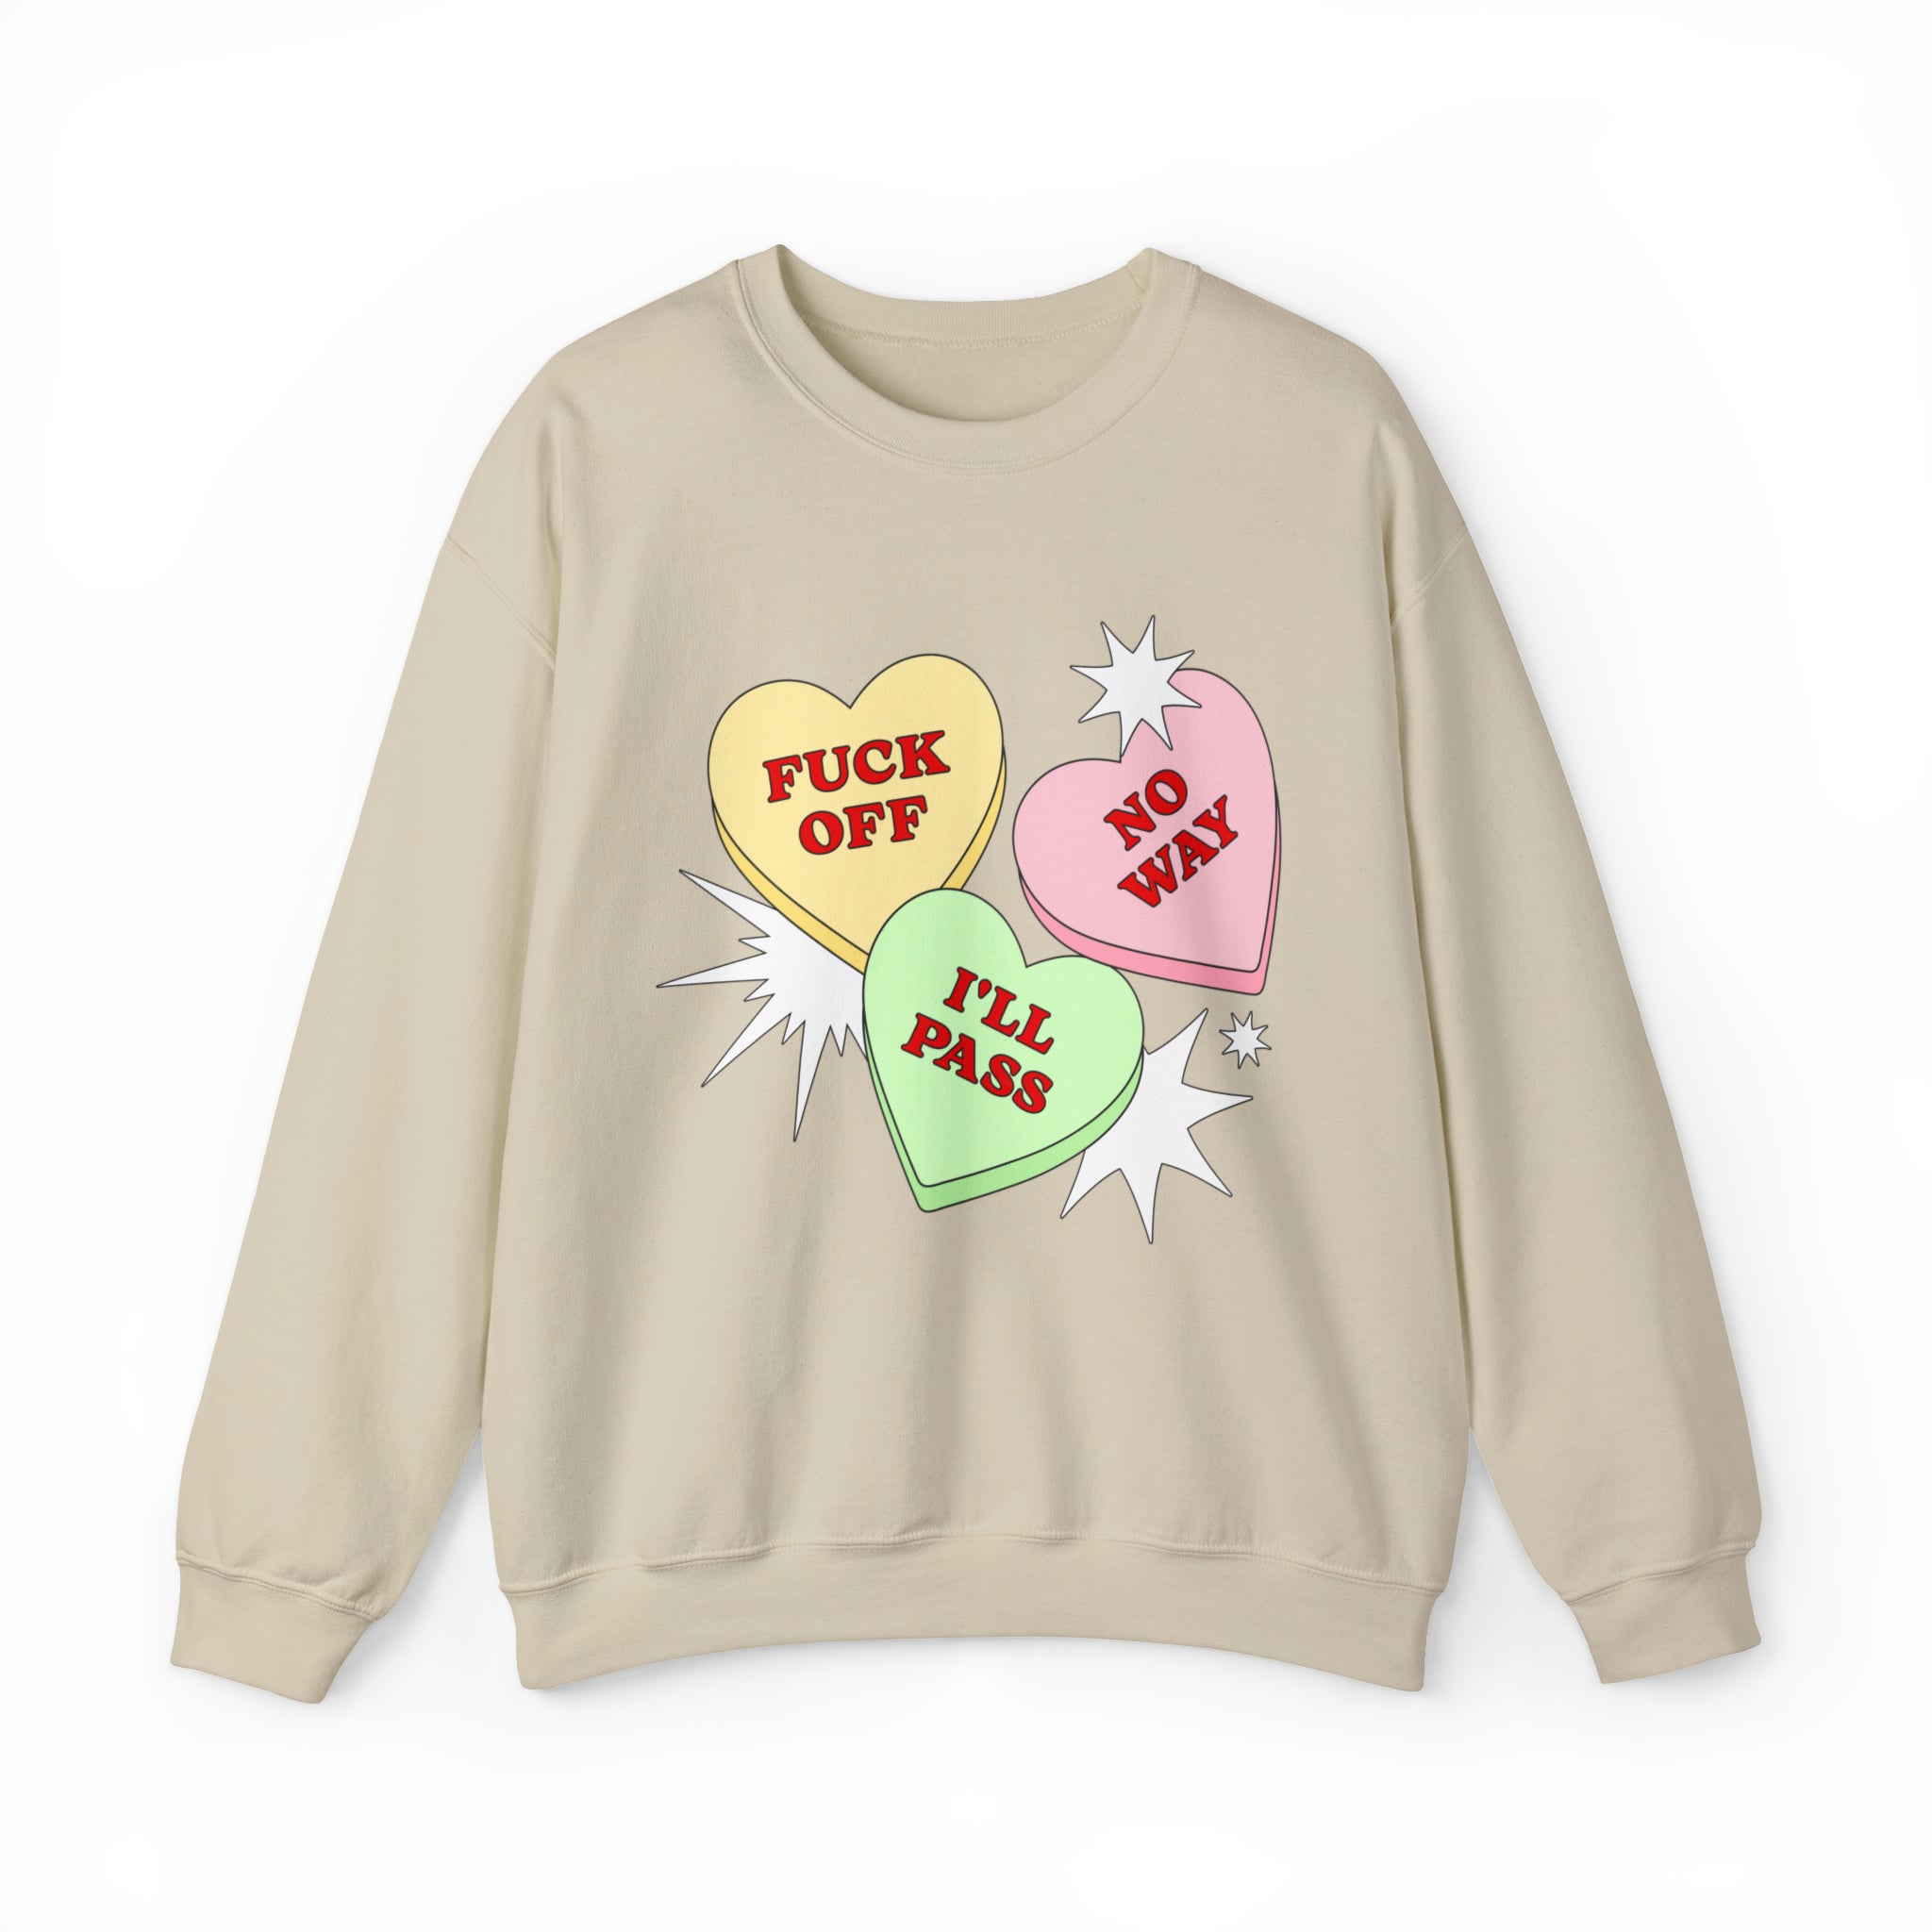 Order now for Candy Hearts Sassy Crewneck Sweatshirt